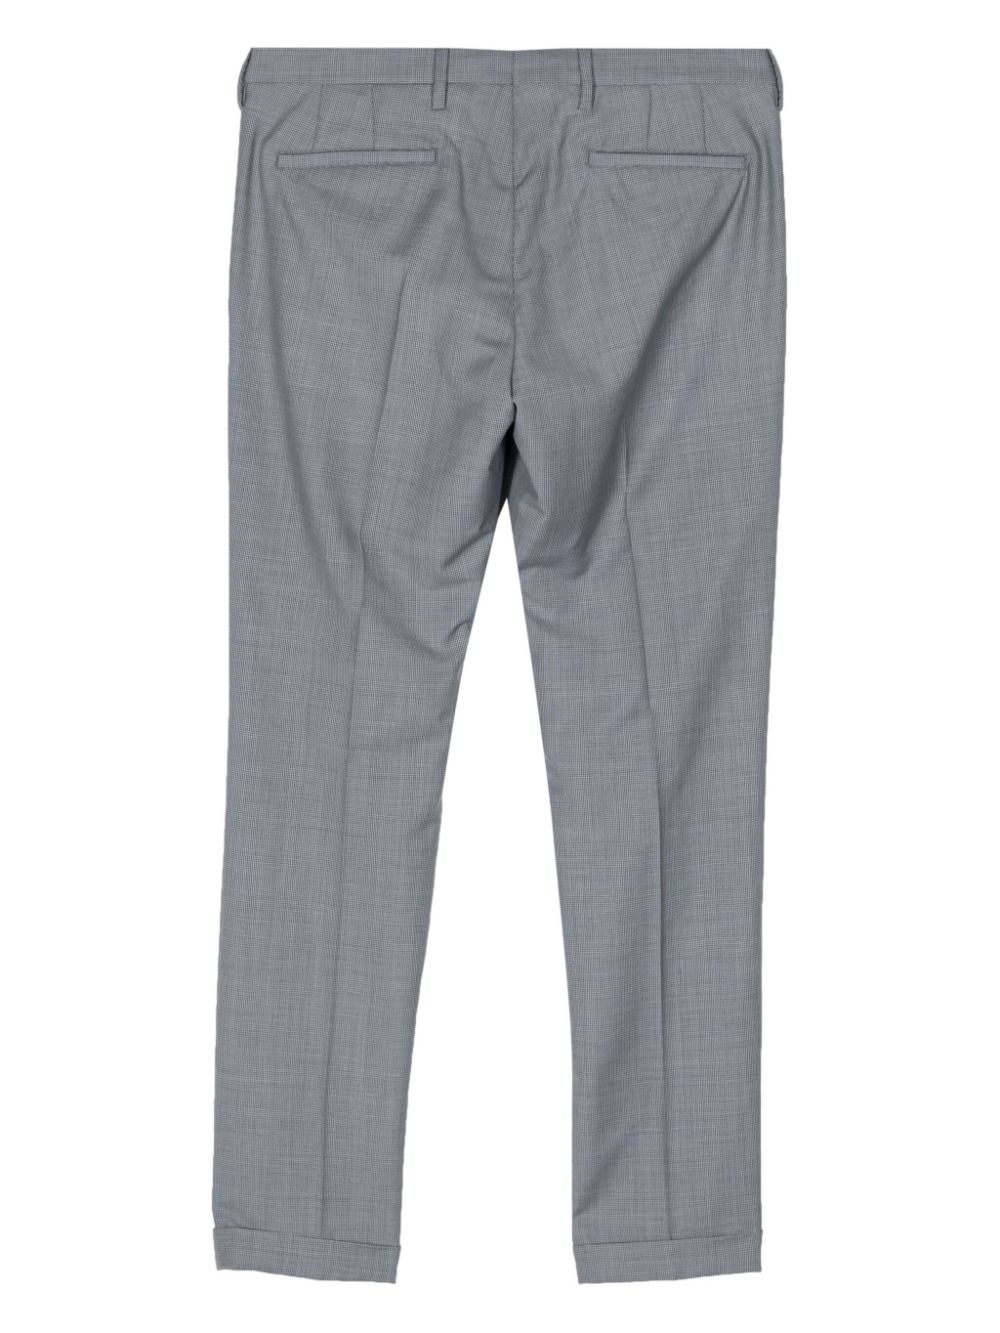 Paul Smith mélange-effect tailored trousers - Blauw